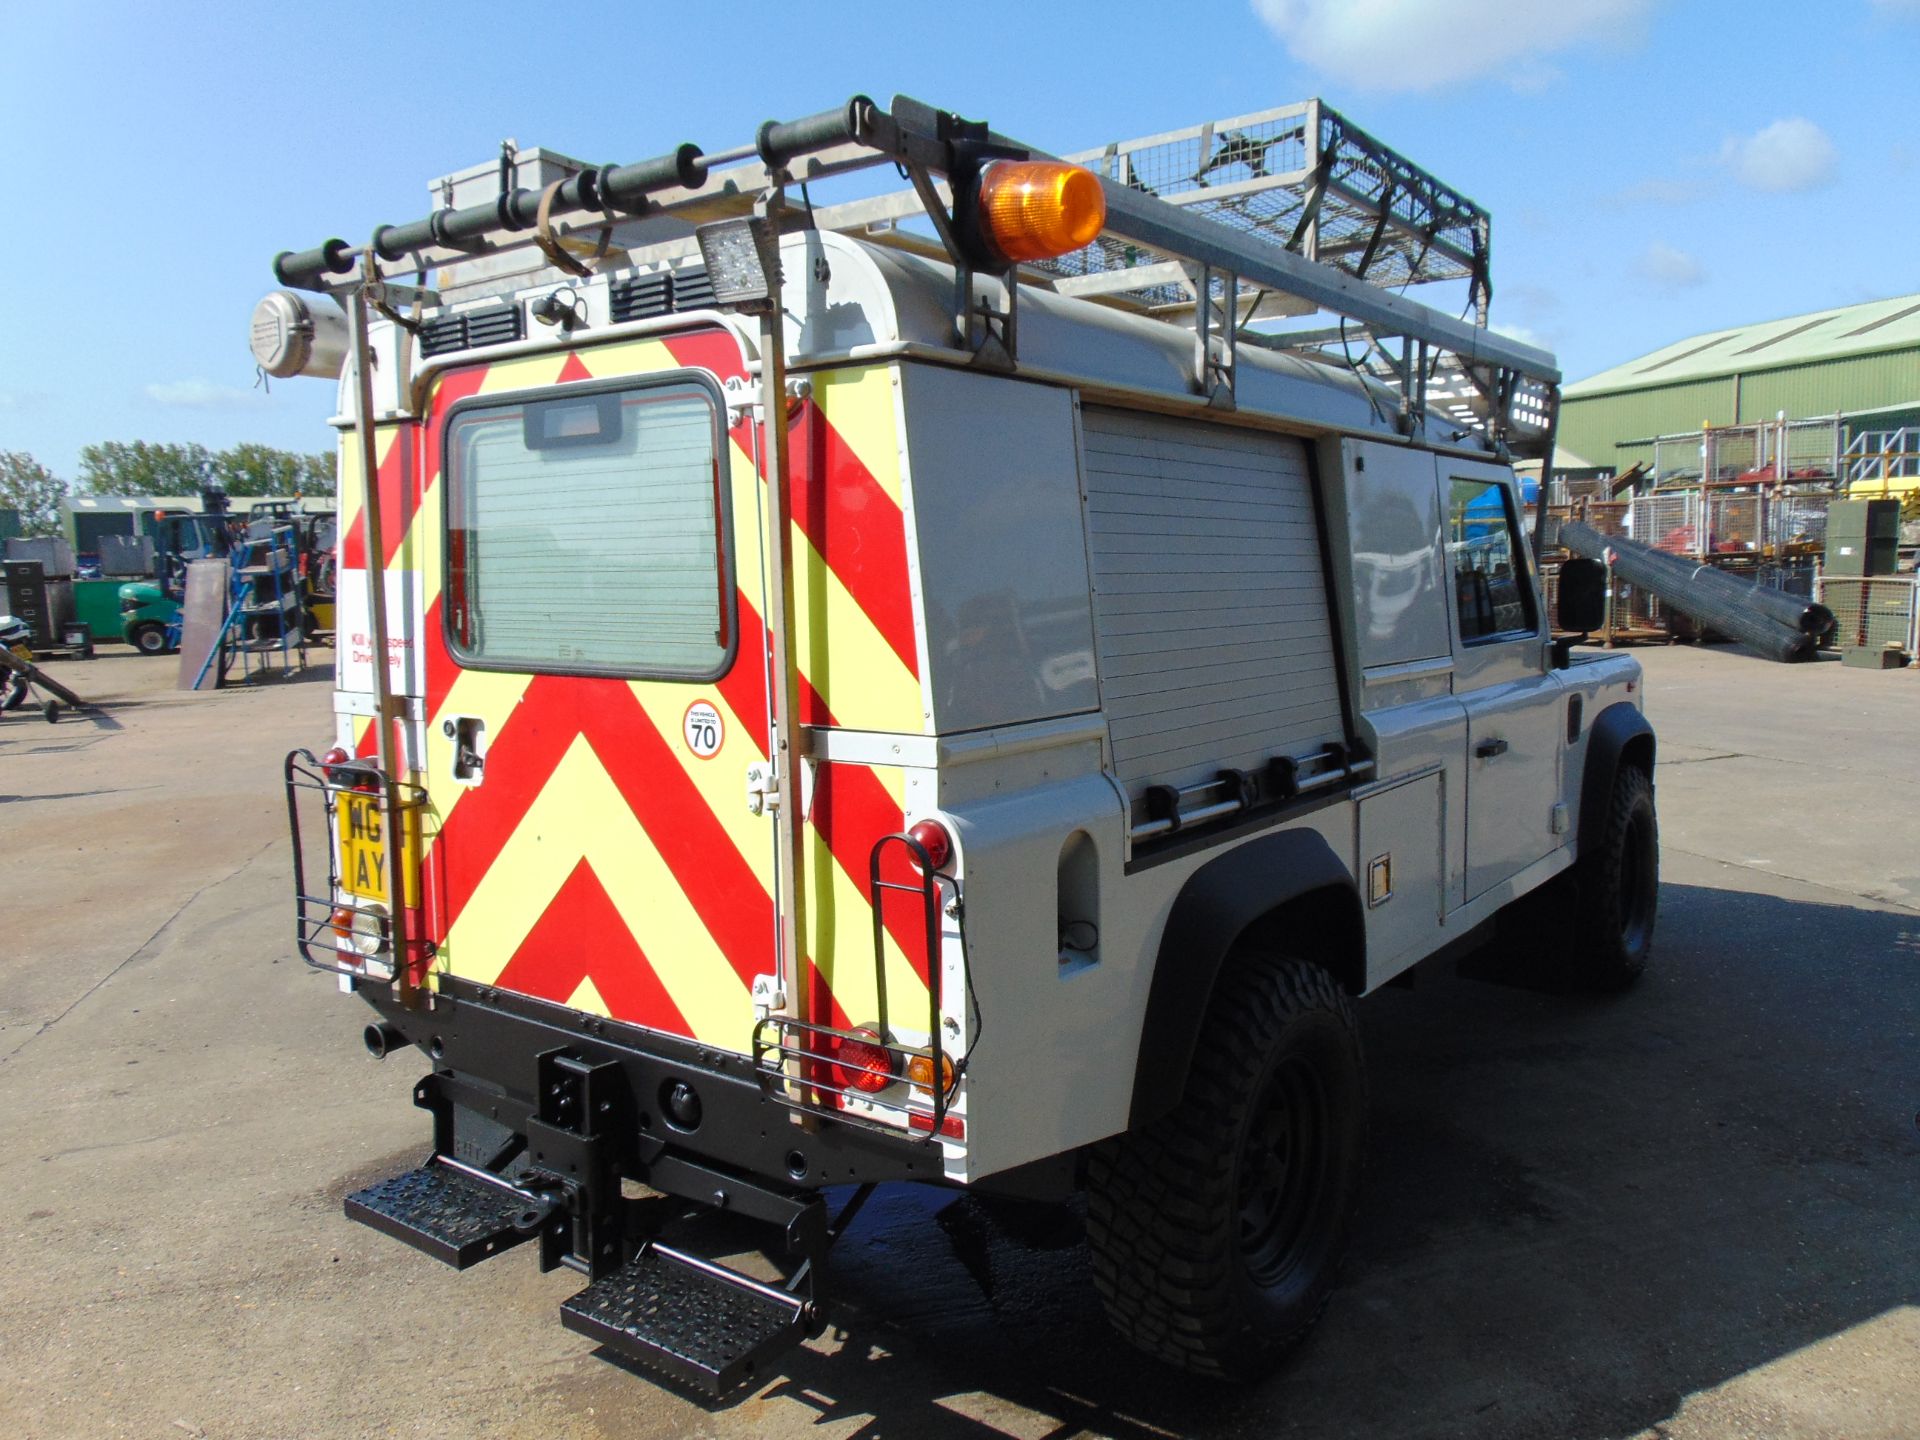 2011 Land Rover Defender 110 Puma hardtop 4x4 Utility vehicle (mobile workshop) with hydraulic winch - Image 10 of 53